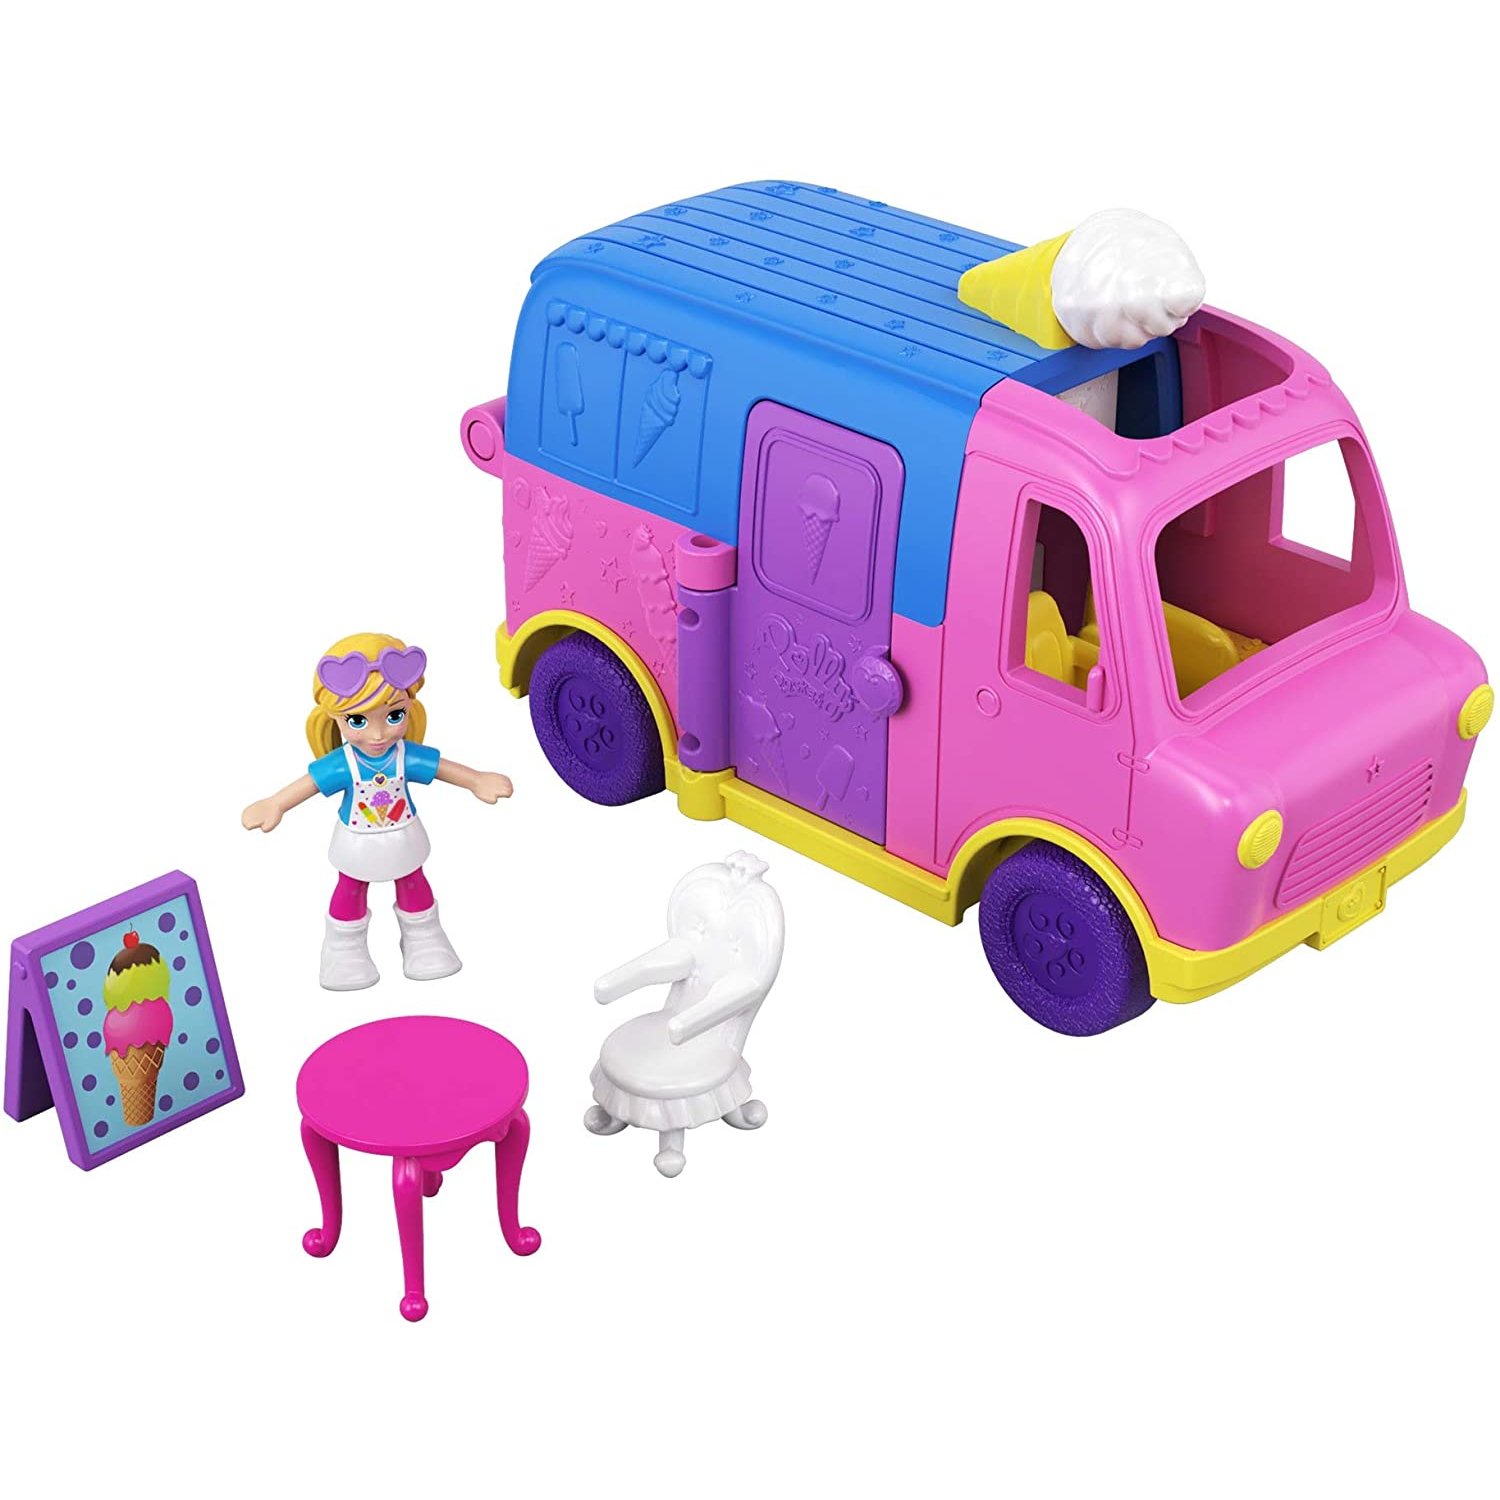 Polly Pocket GGC40 Pollyville Ice Cream Truck with Play Areas, Doll & More, Multicolour